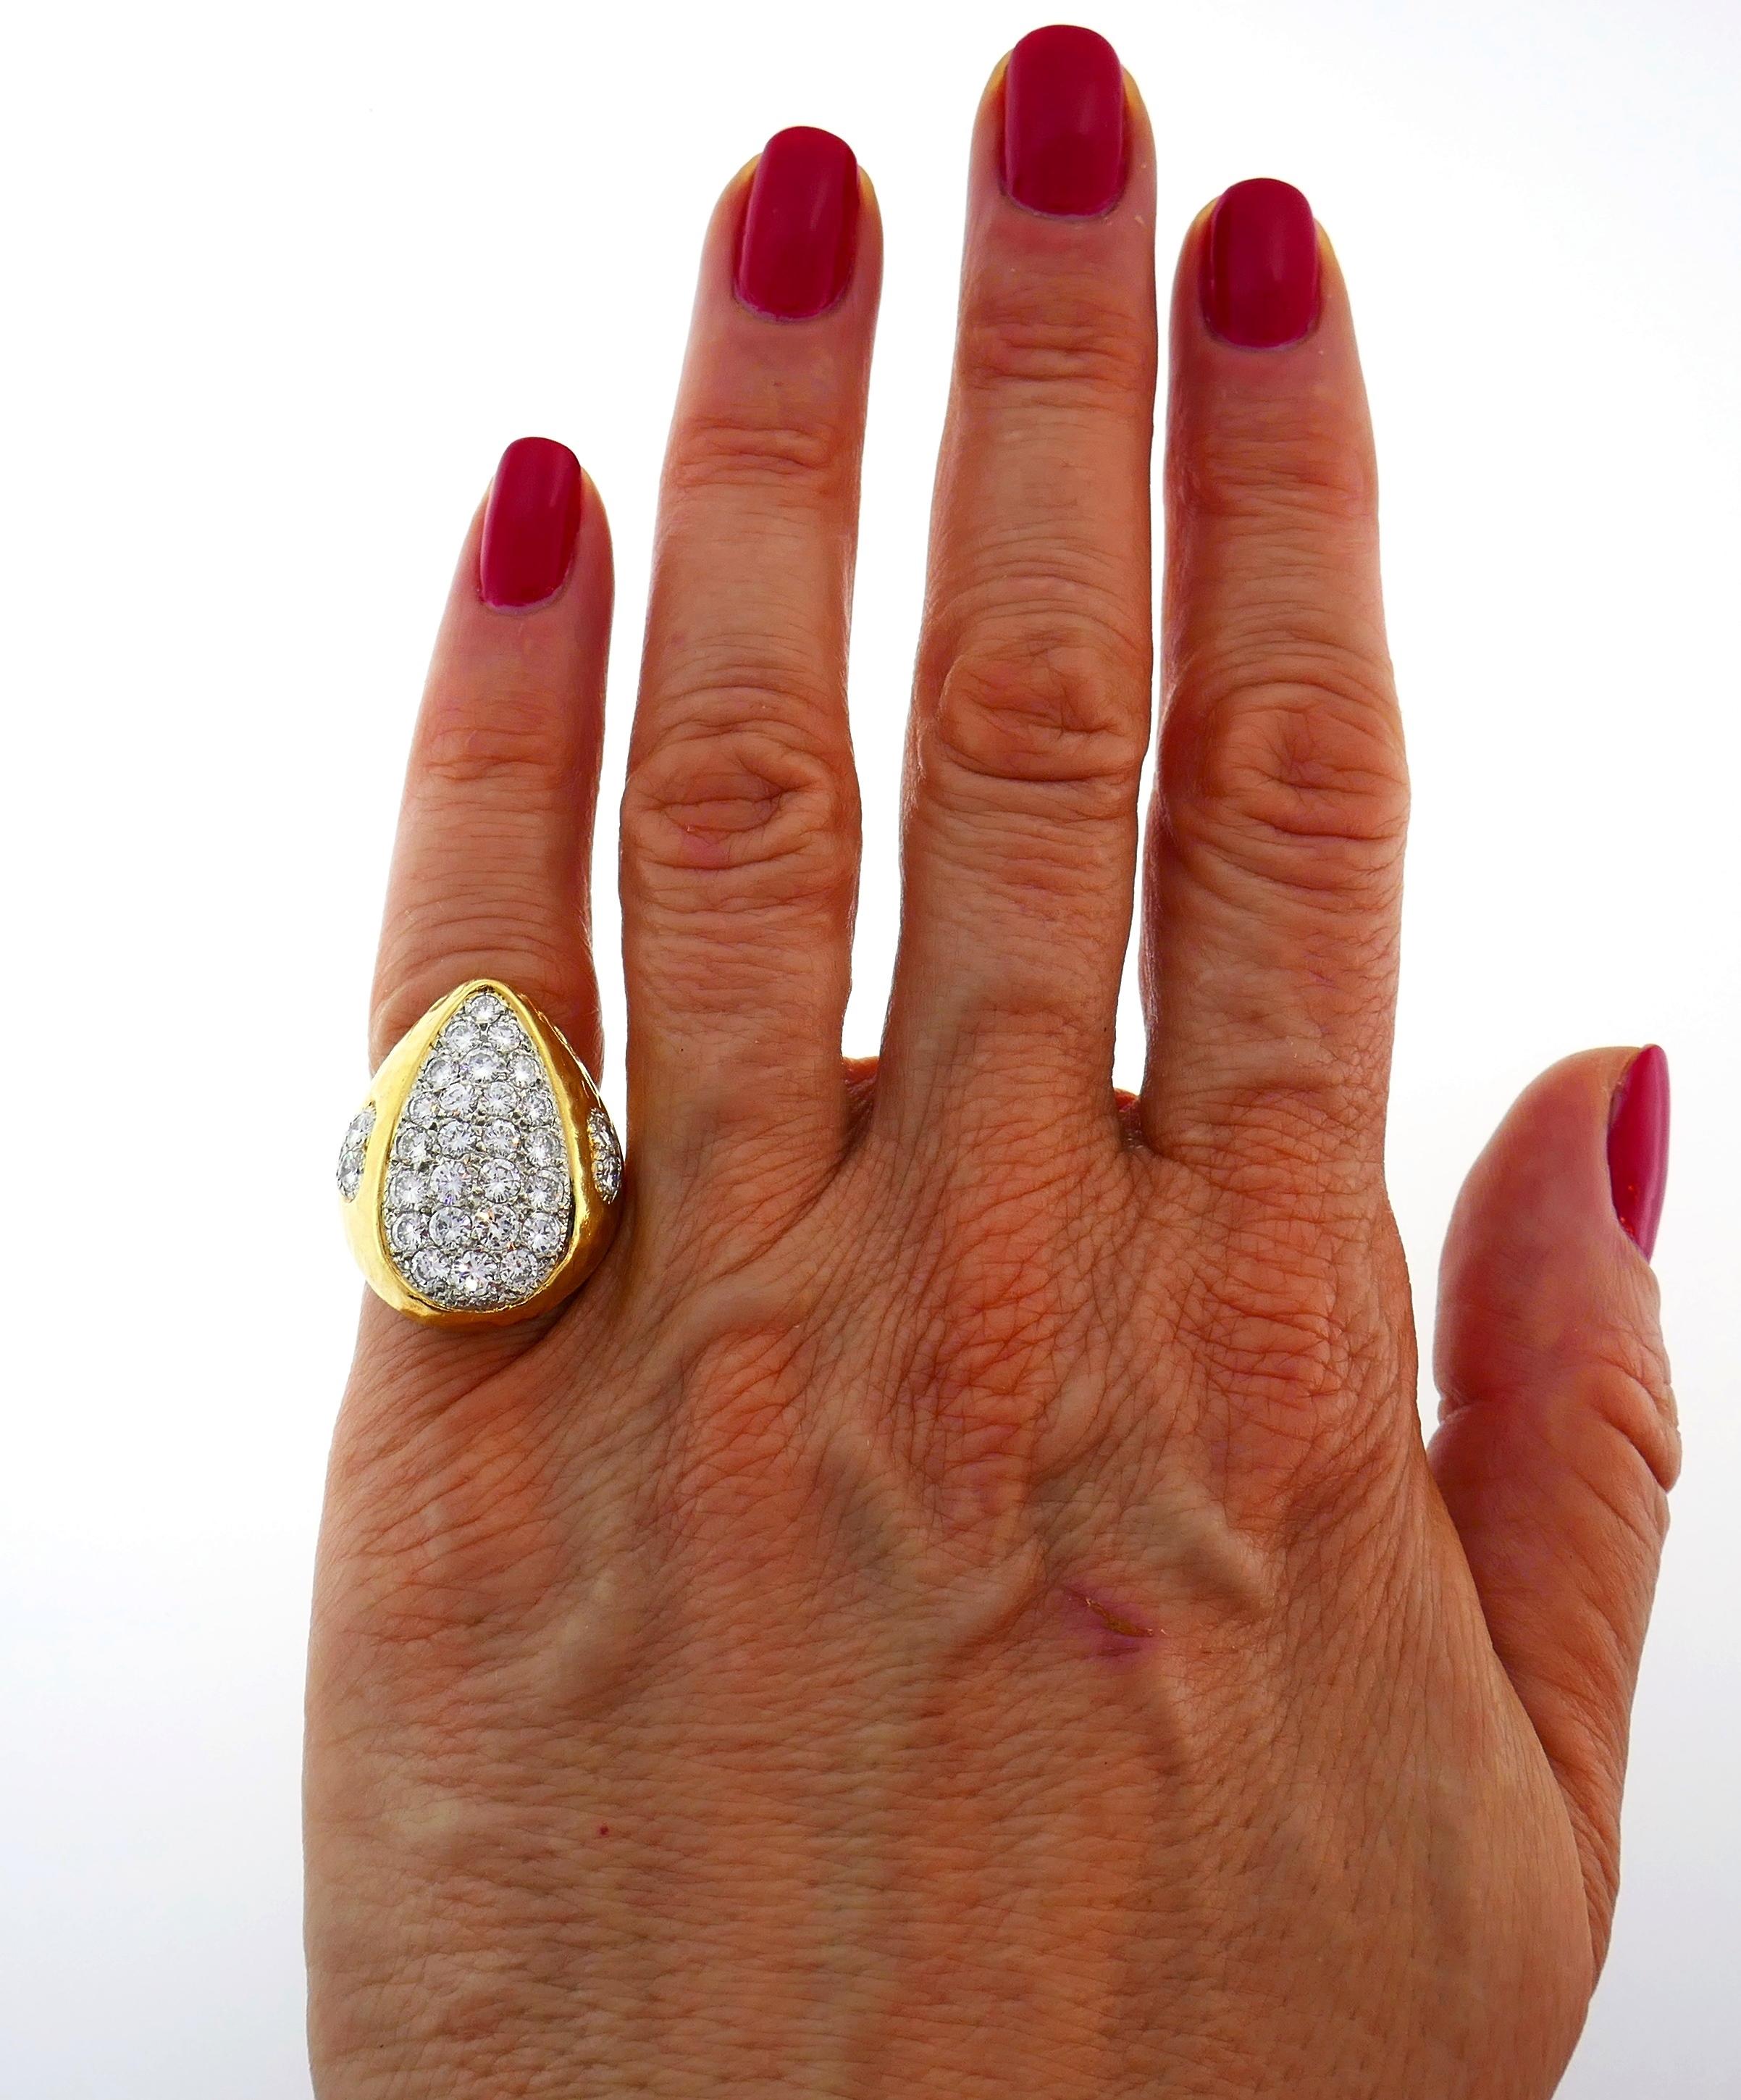 Bold and articulated diamond cocktail ring created by Van Cleef & Arpels in the 1980s. French chic and wearable, the ring is a great addition to your jewelry collection.
It is made of 18 karat (tested) yellow gold micropave set with round brilliant